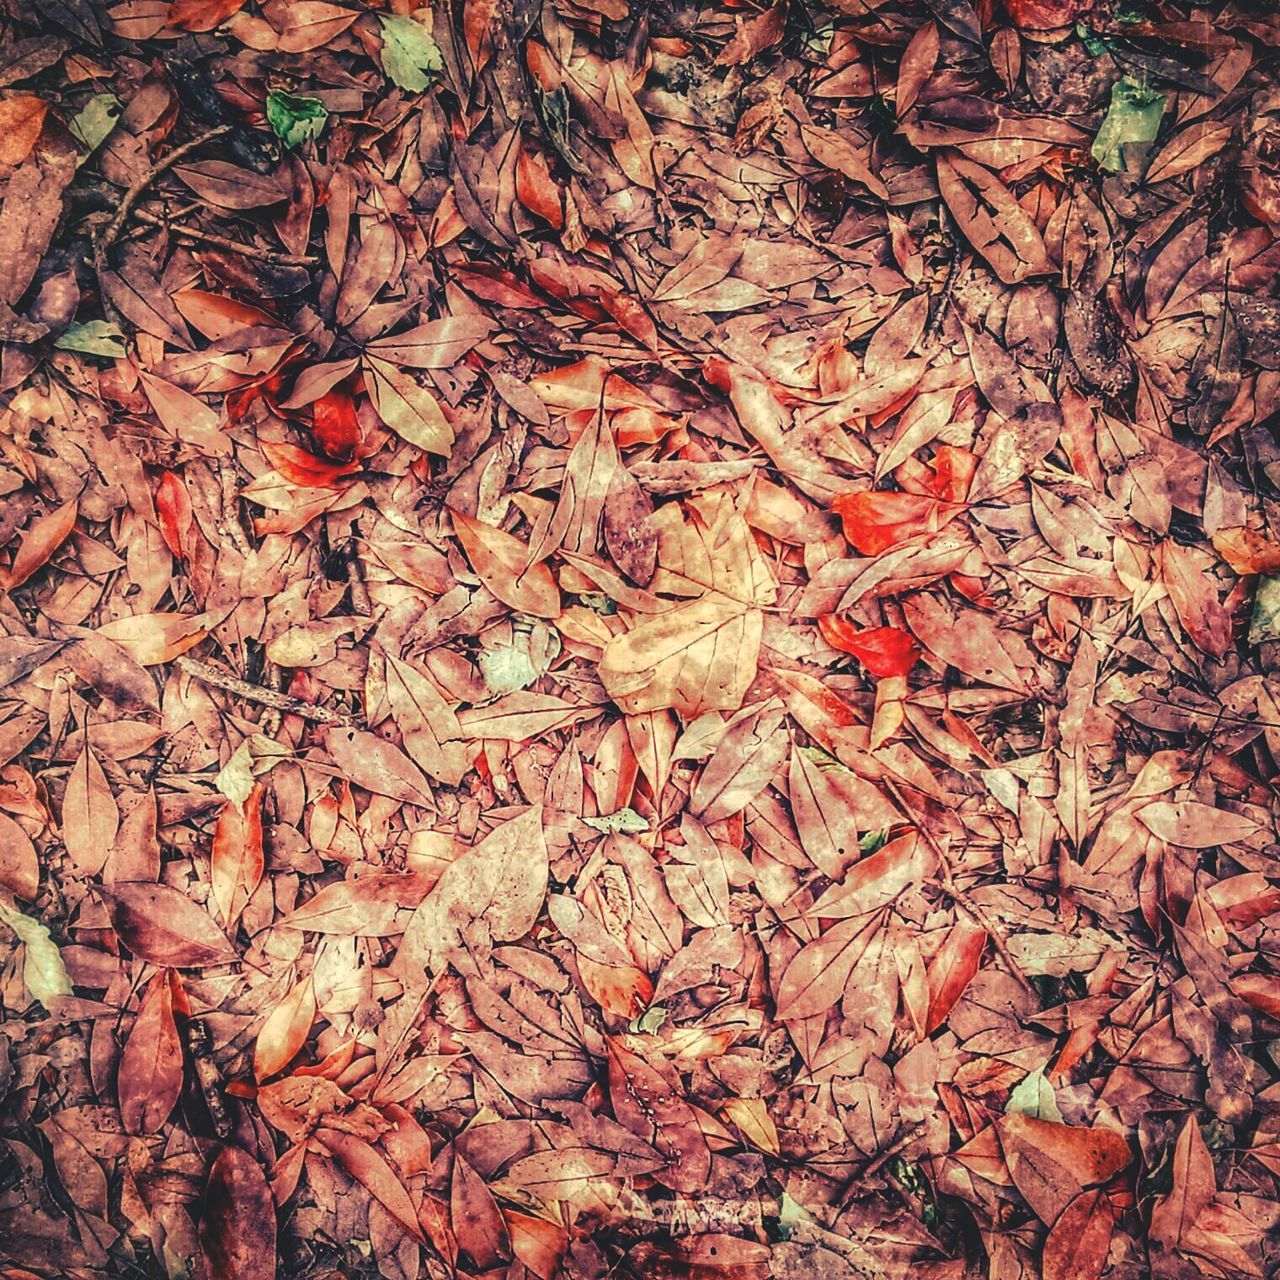 autumn, leaf, change, dry, high angle view, full frame, leaves, backgrounds, season, nature, fallen, close-up, day, red, abundance, field, textured, outdoors, growth, brown